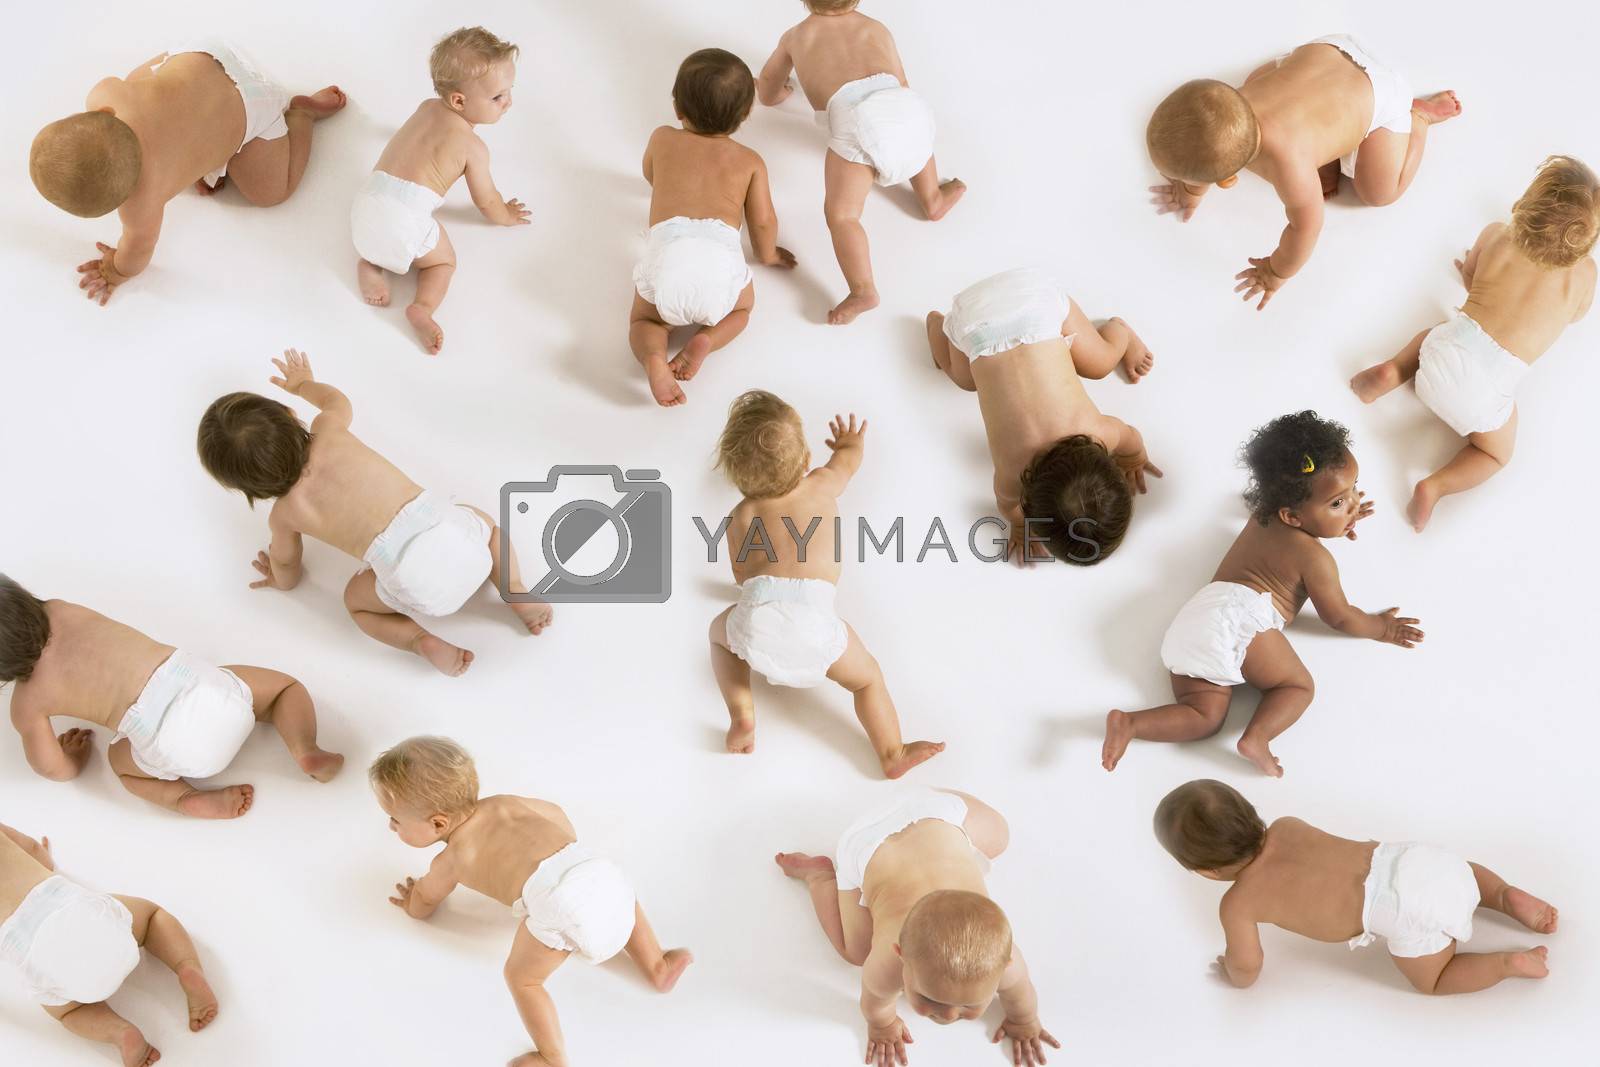 Large Group of Babies montage